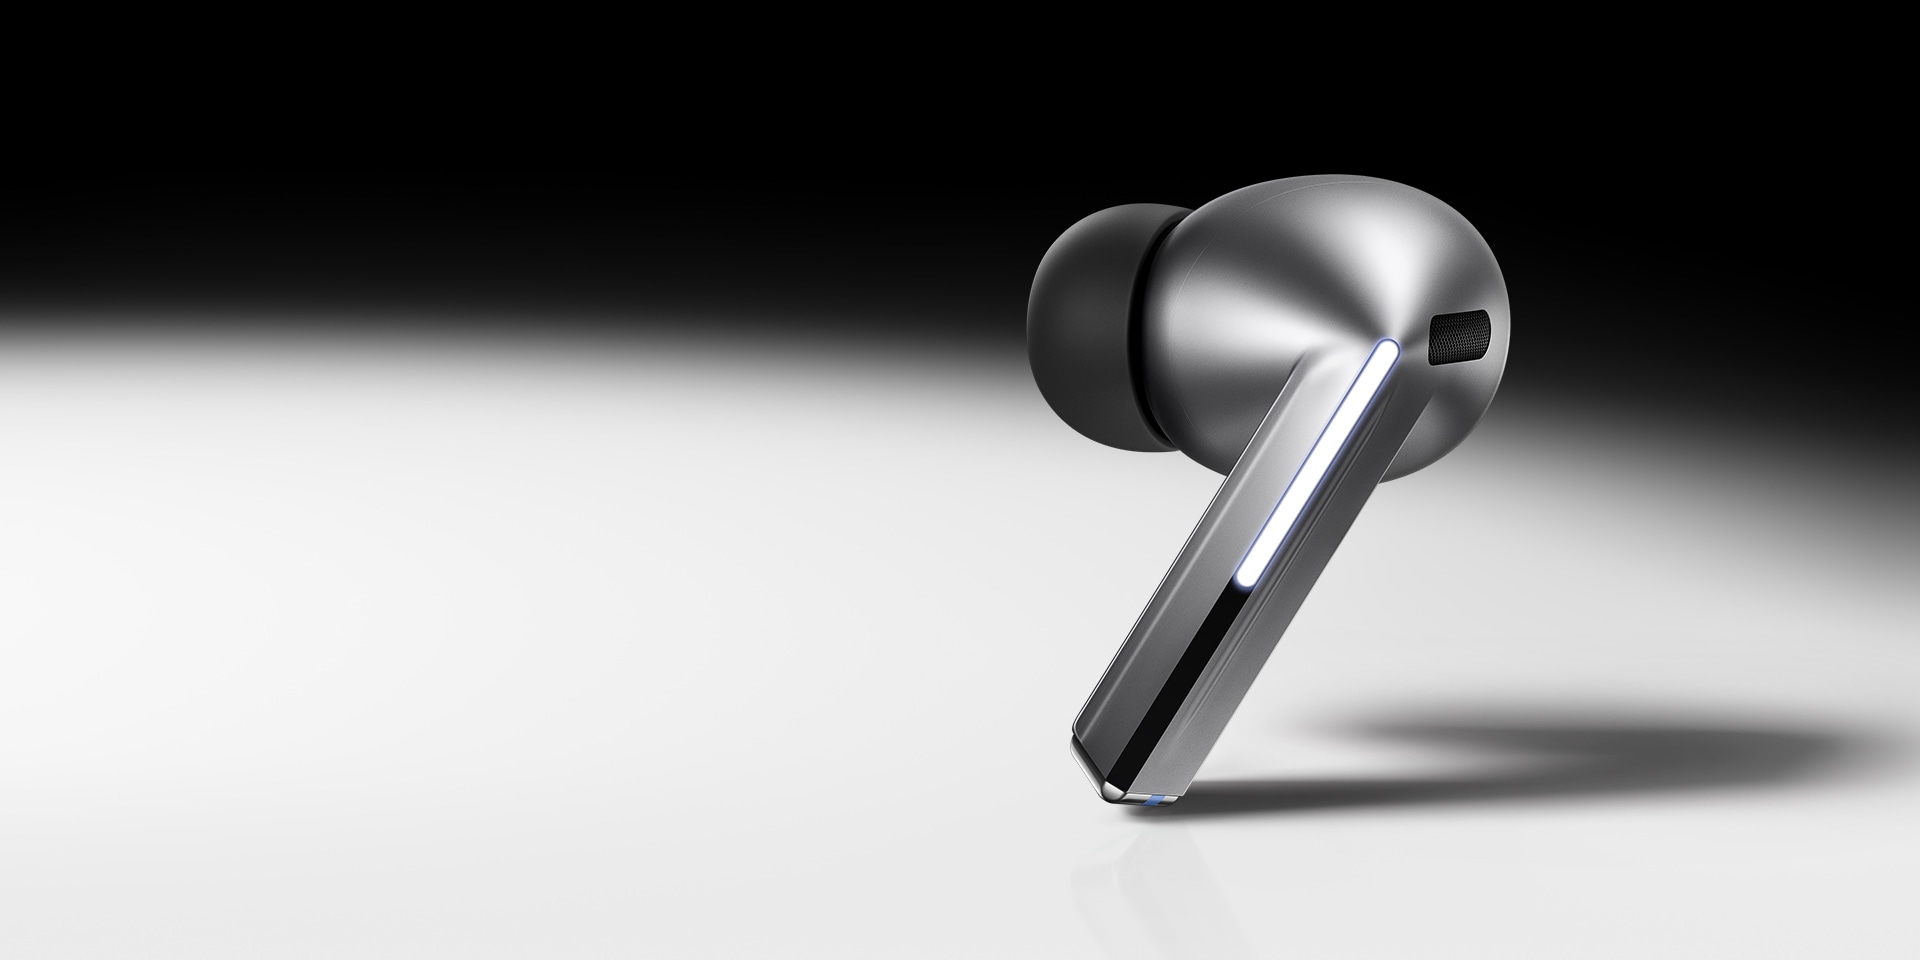 A single, silver colored Galaxy Buds3 Pro earbud on a black and white gradient background.